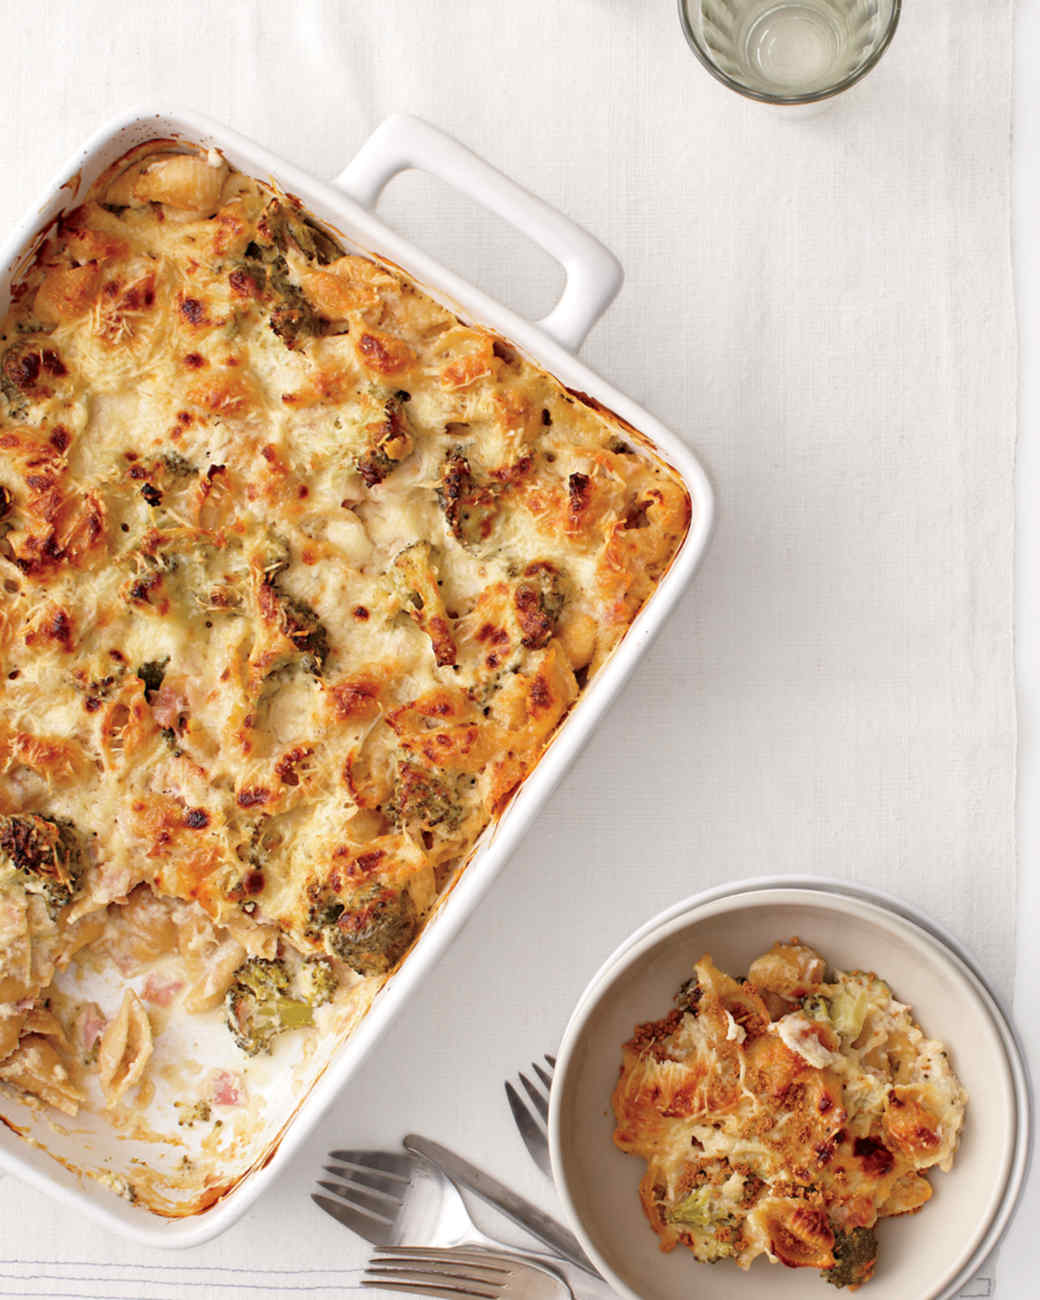 Dinner Casserole Recipes That the Whole Family Will Love | Martha Stewart